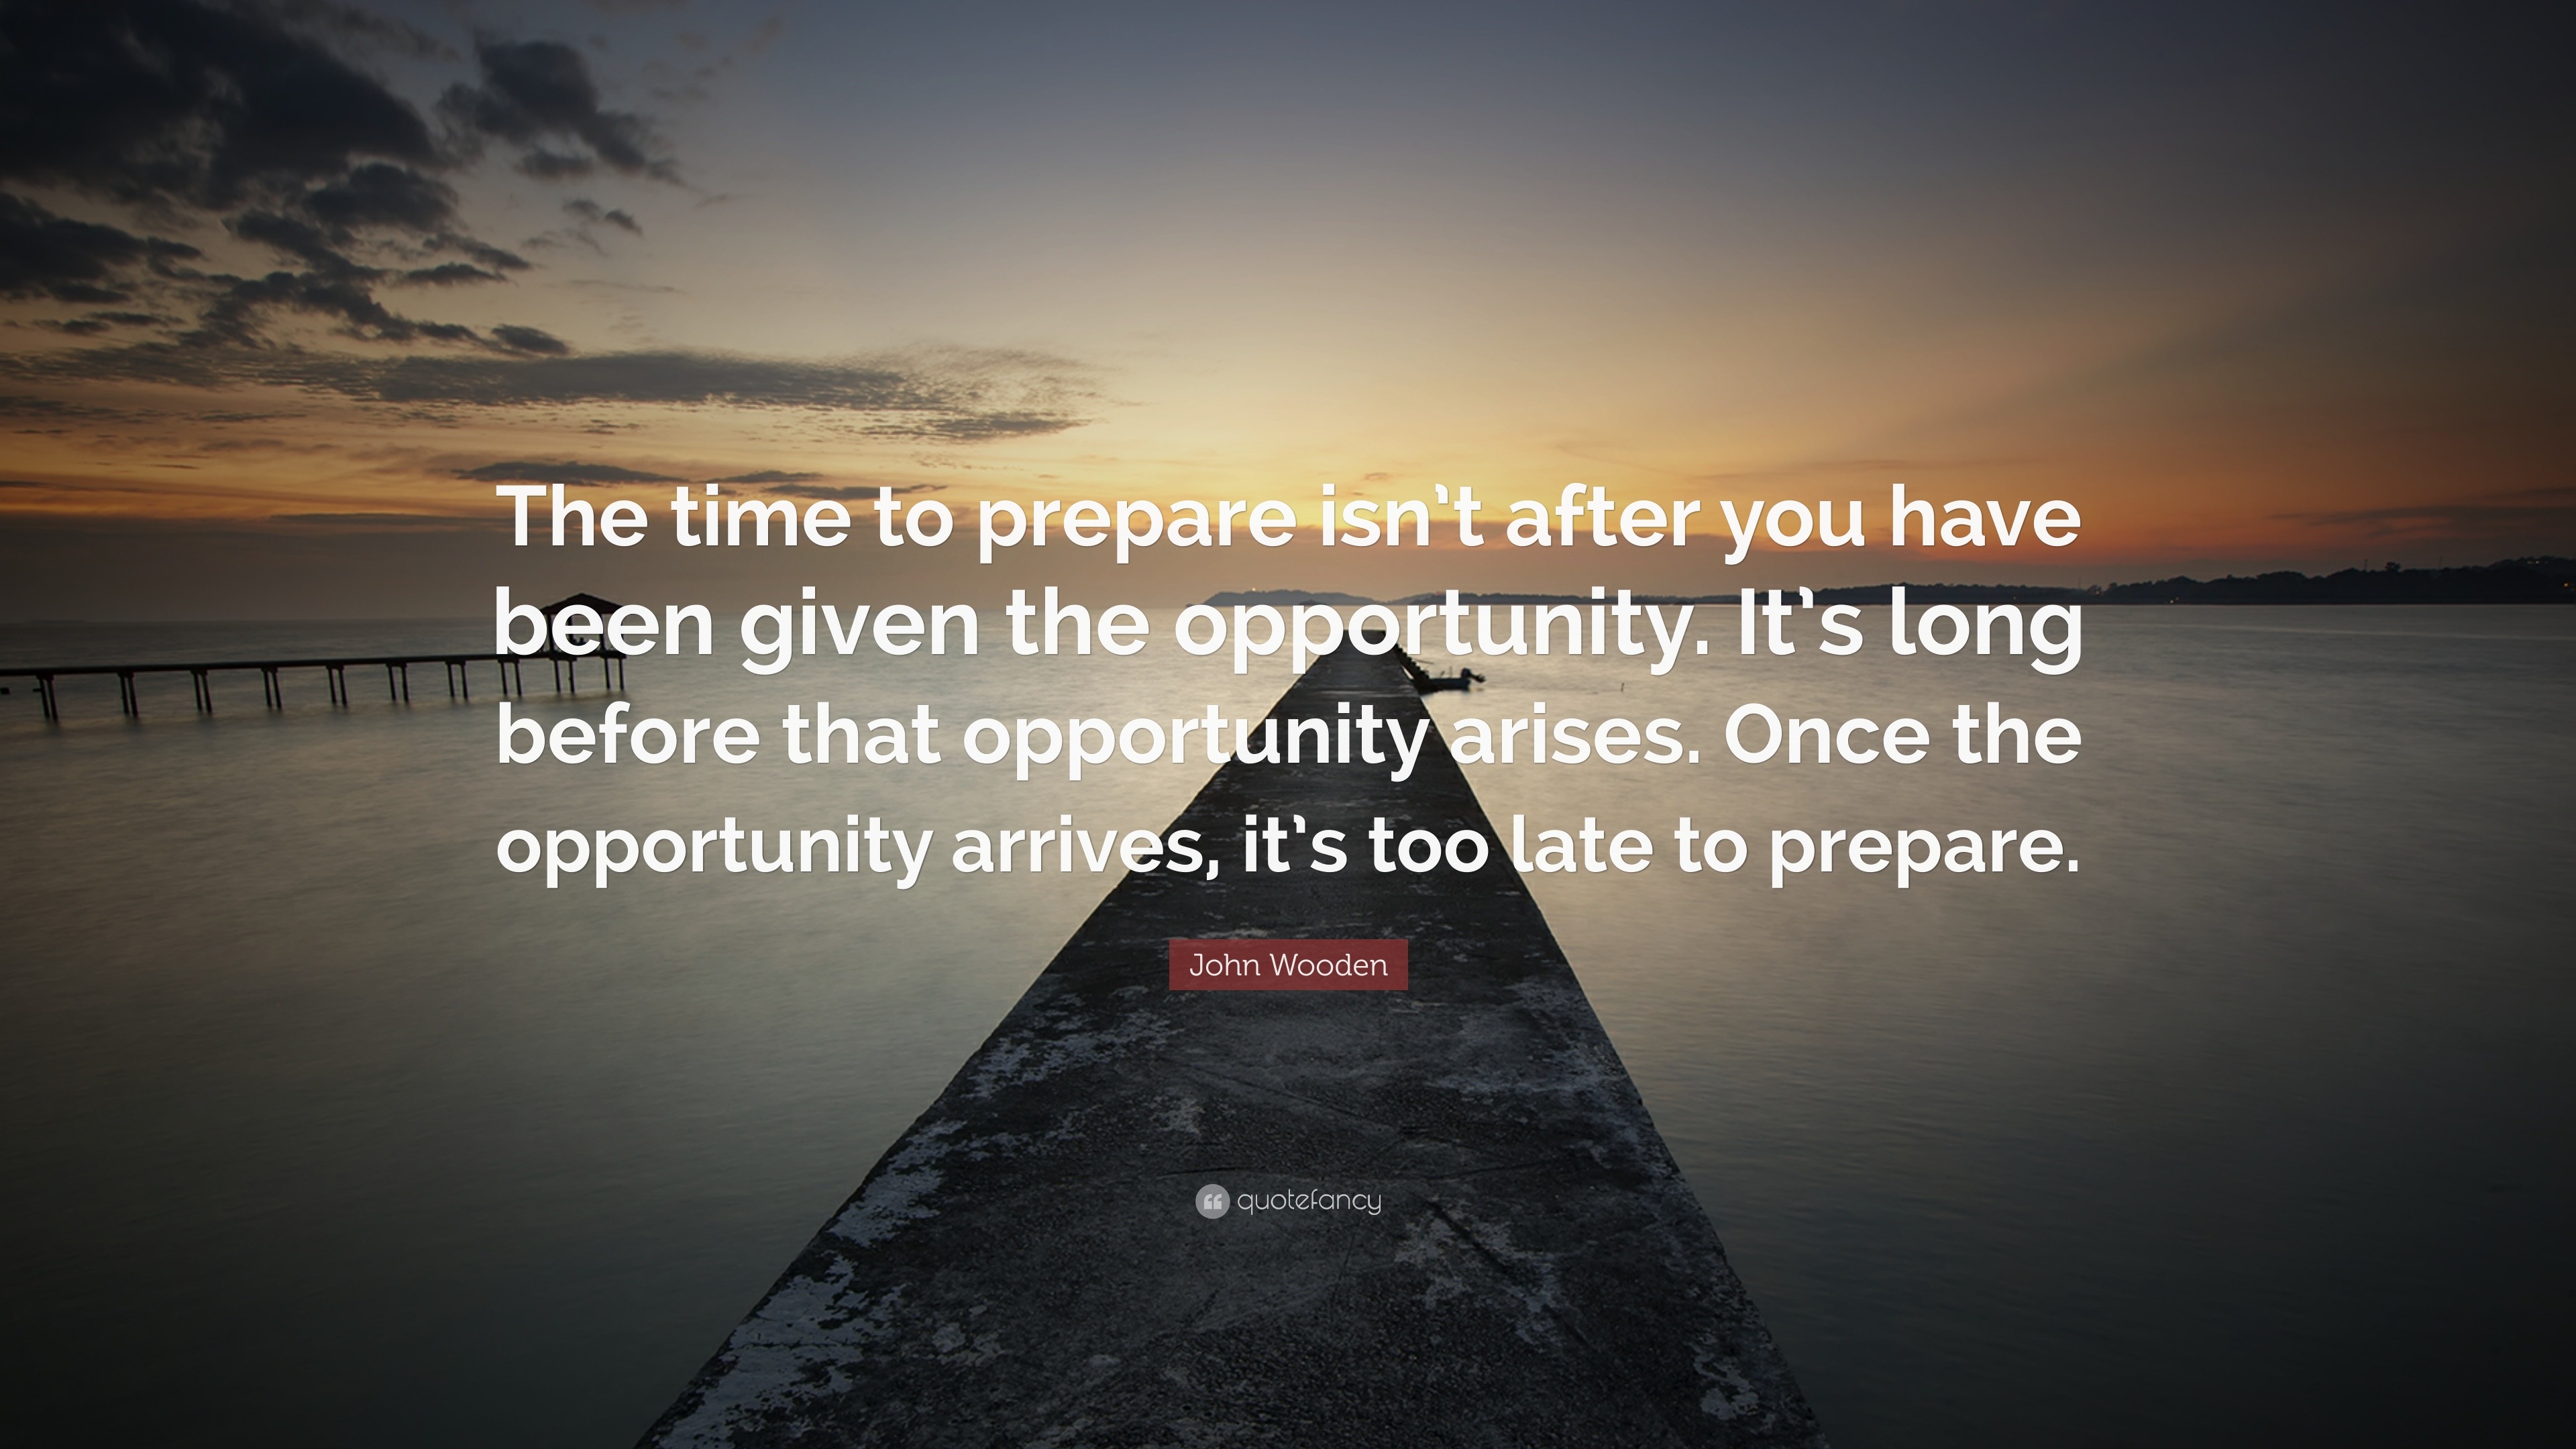 John Wooden Quote “the Time To Prepare Isnt After You Have Been Given